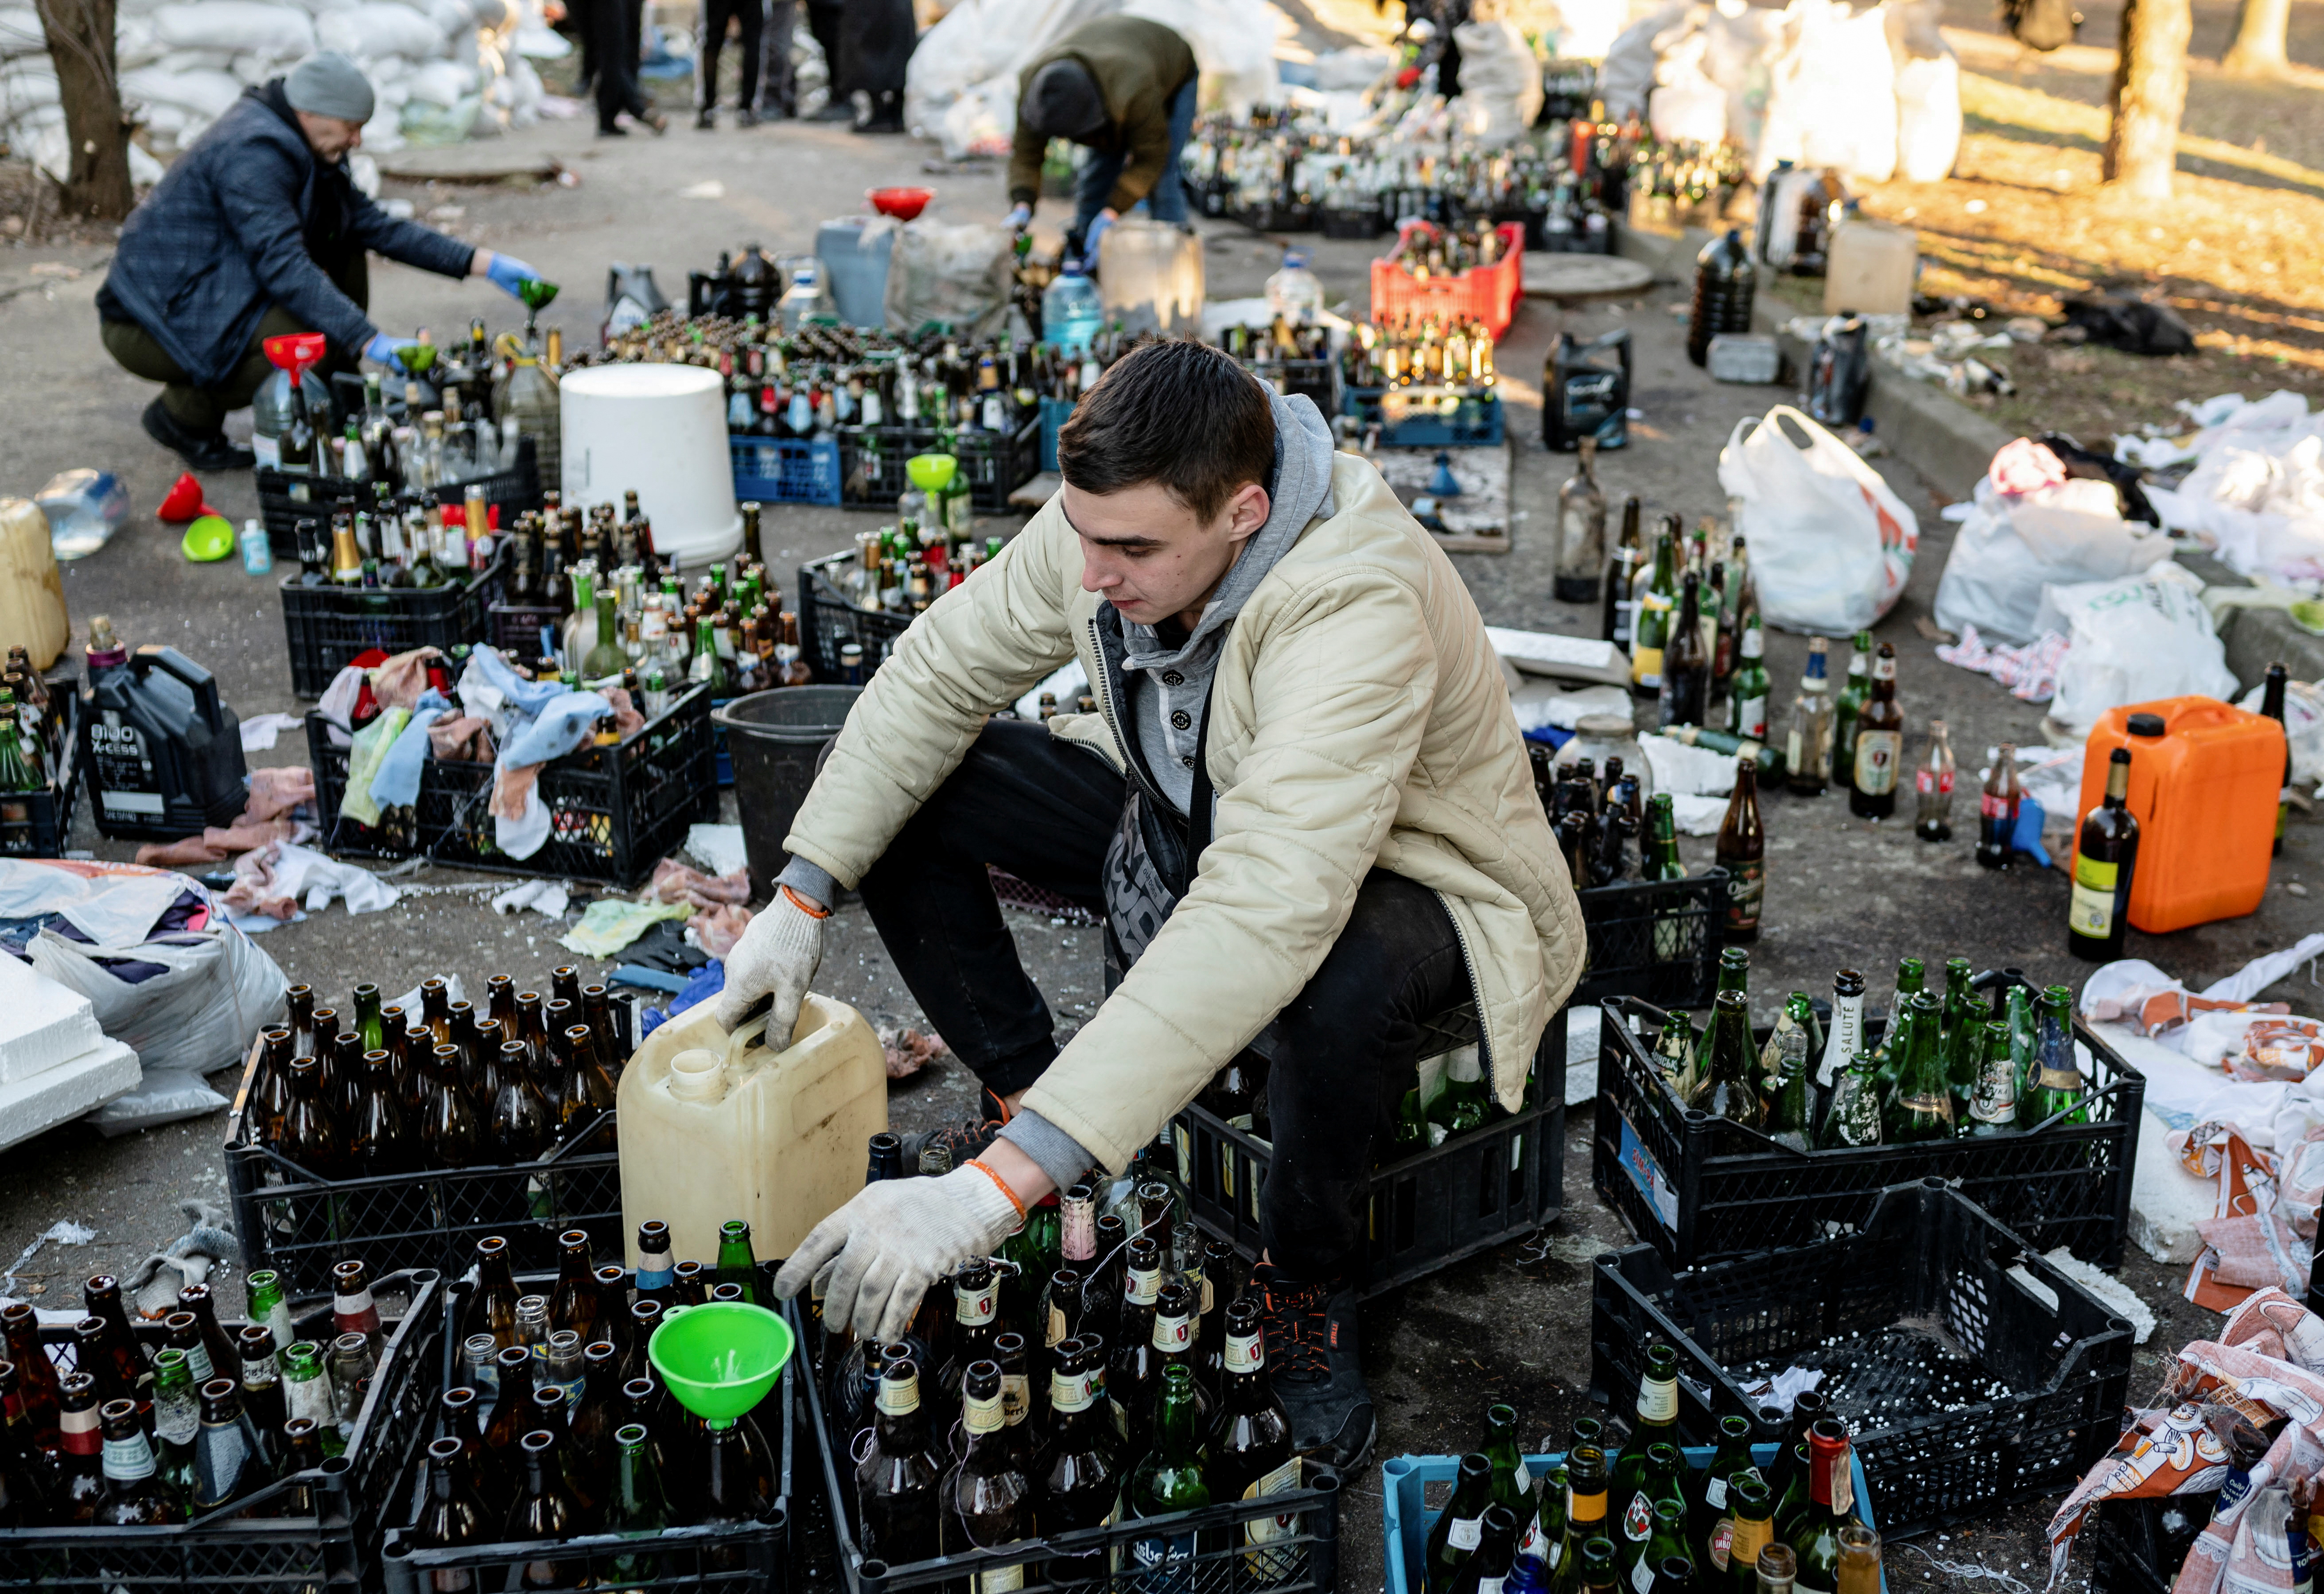 Local residents prepare Molotov cocktails to defend their city, in Zhytomyr